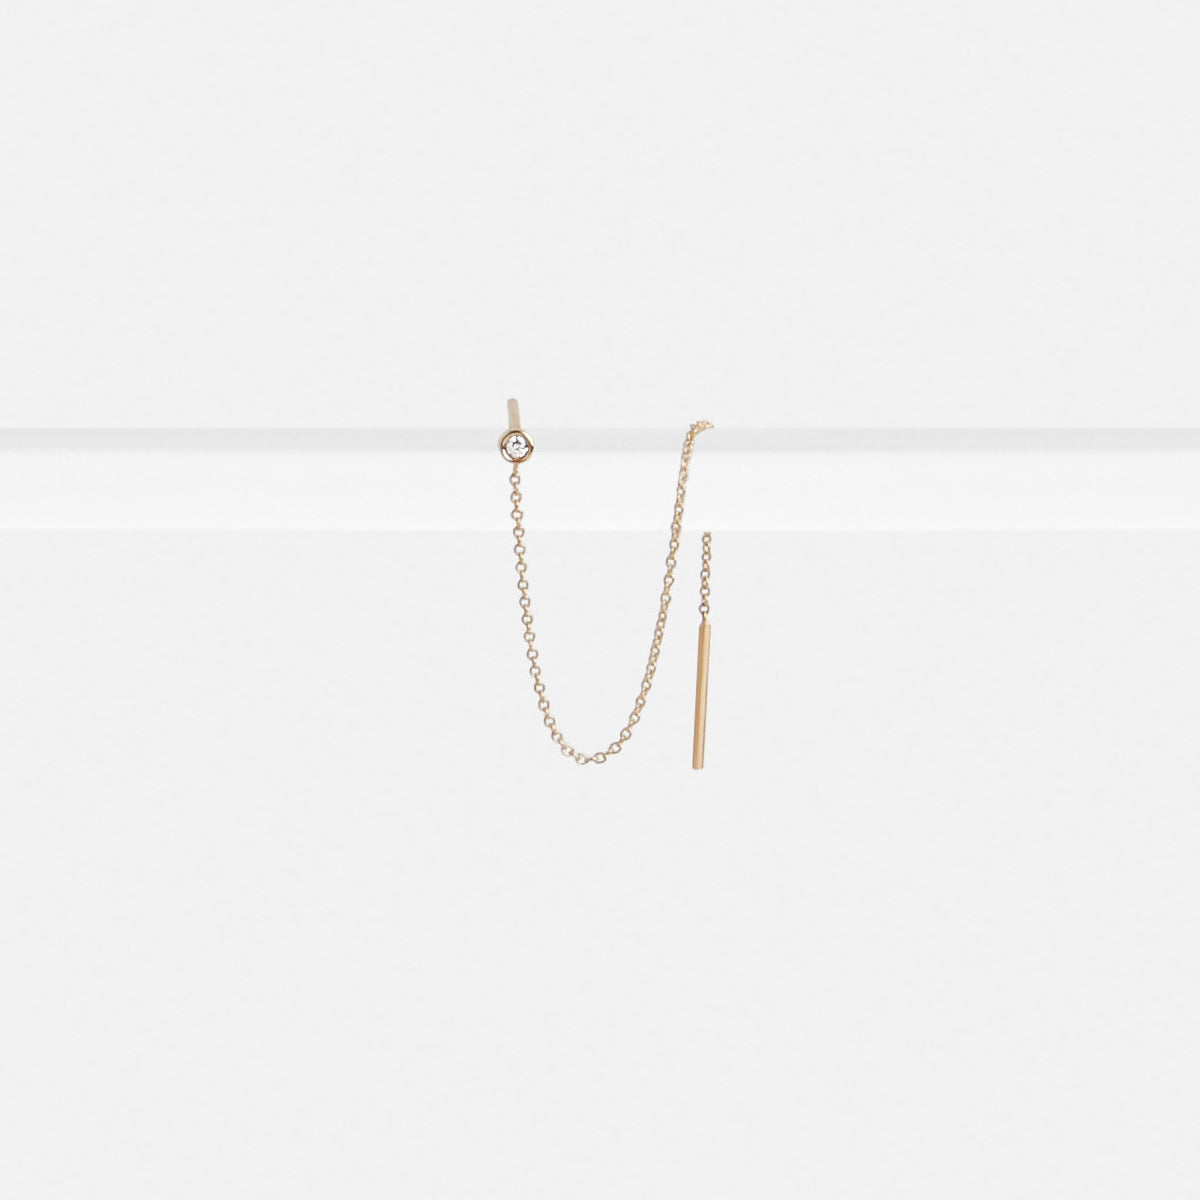 Vesa Designer Threader Earring in 14k Gold set with White Diamond By SHW Fine Jewelry NYC